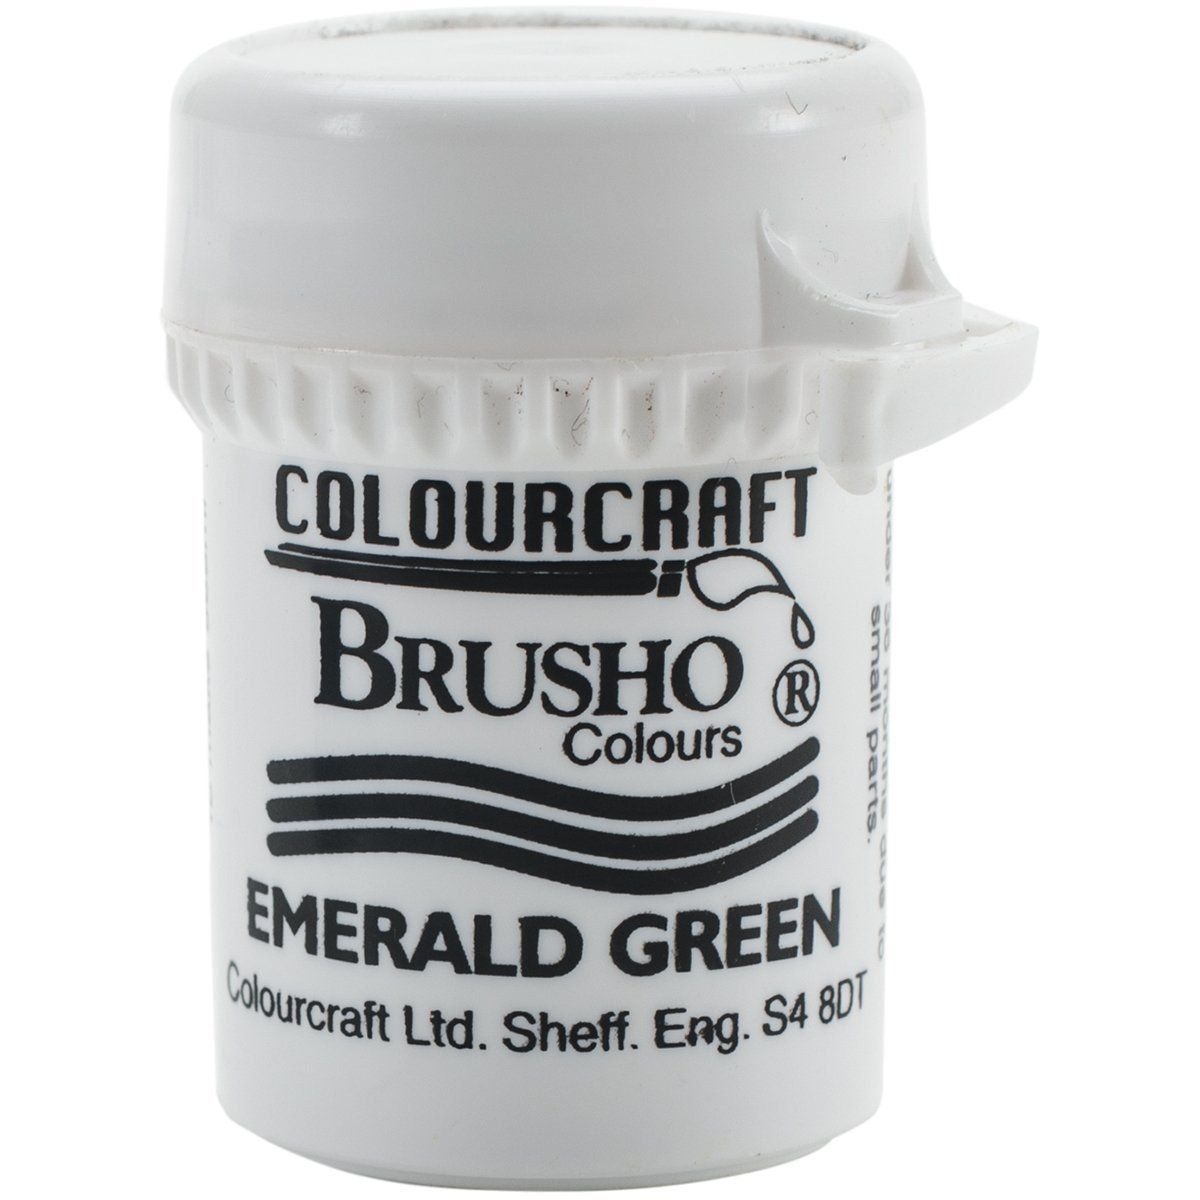 Brusho Crystal Colour - Emerald Green 15 gm